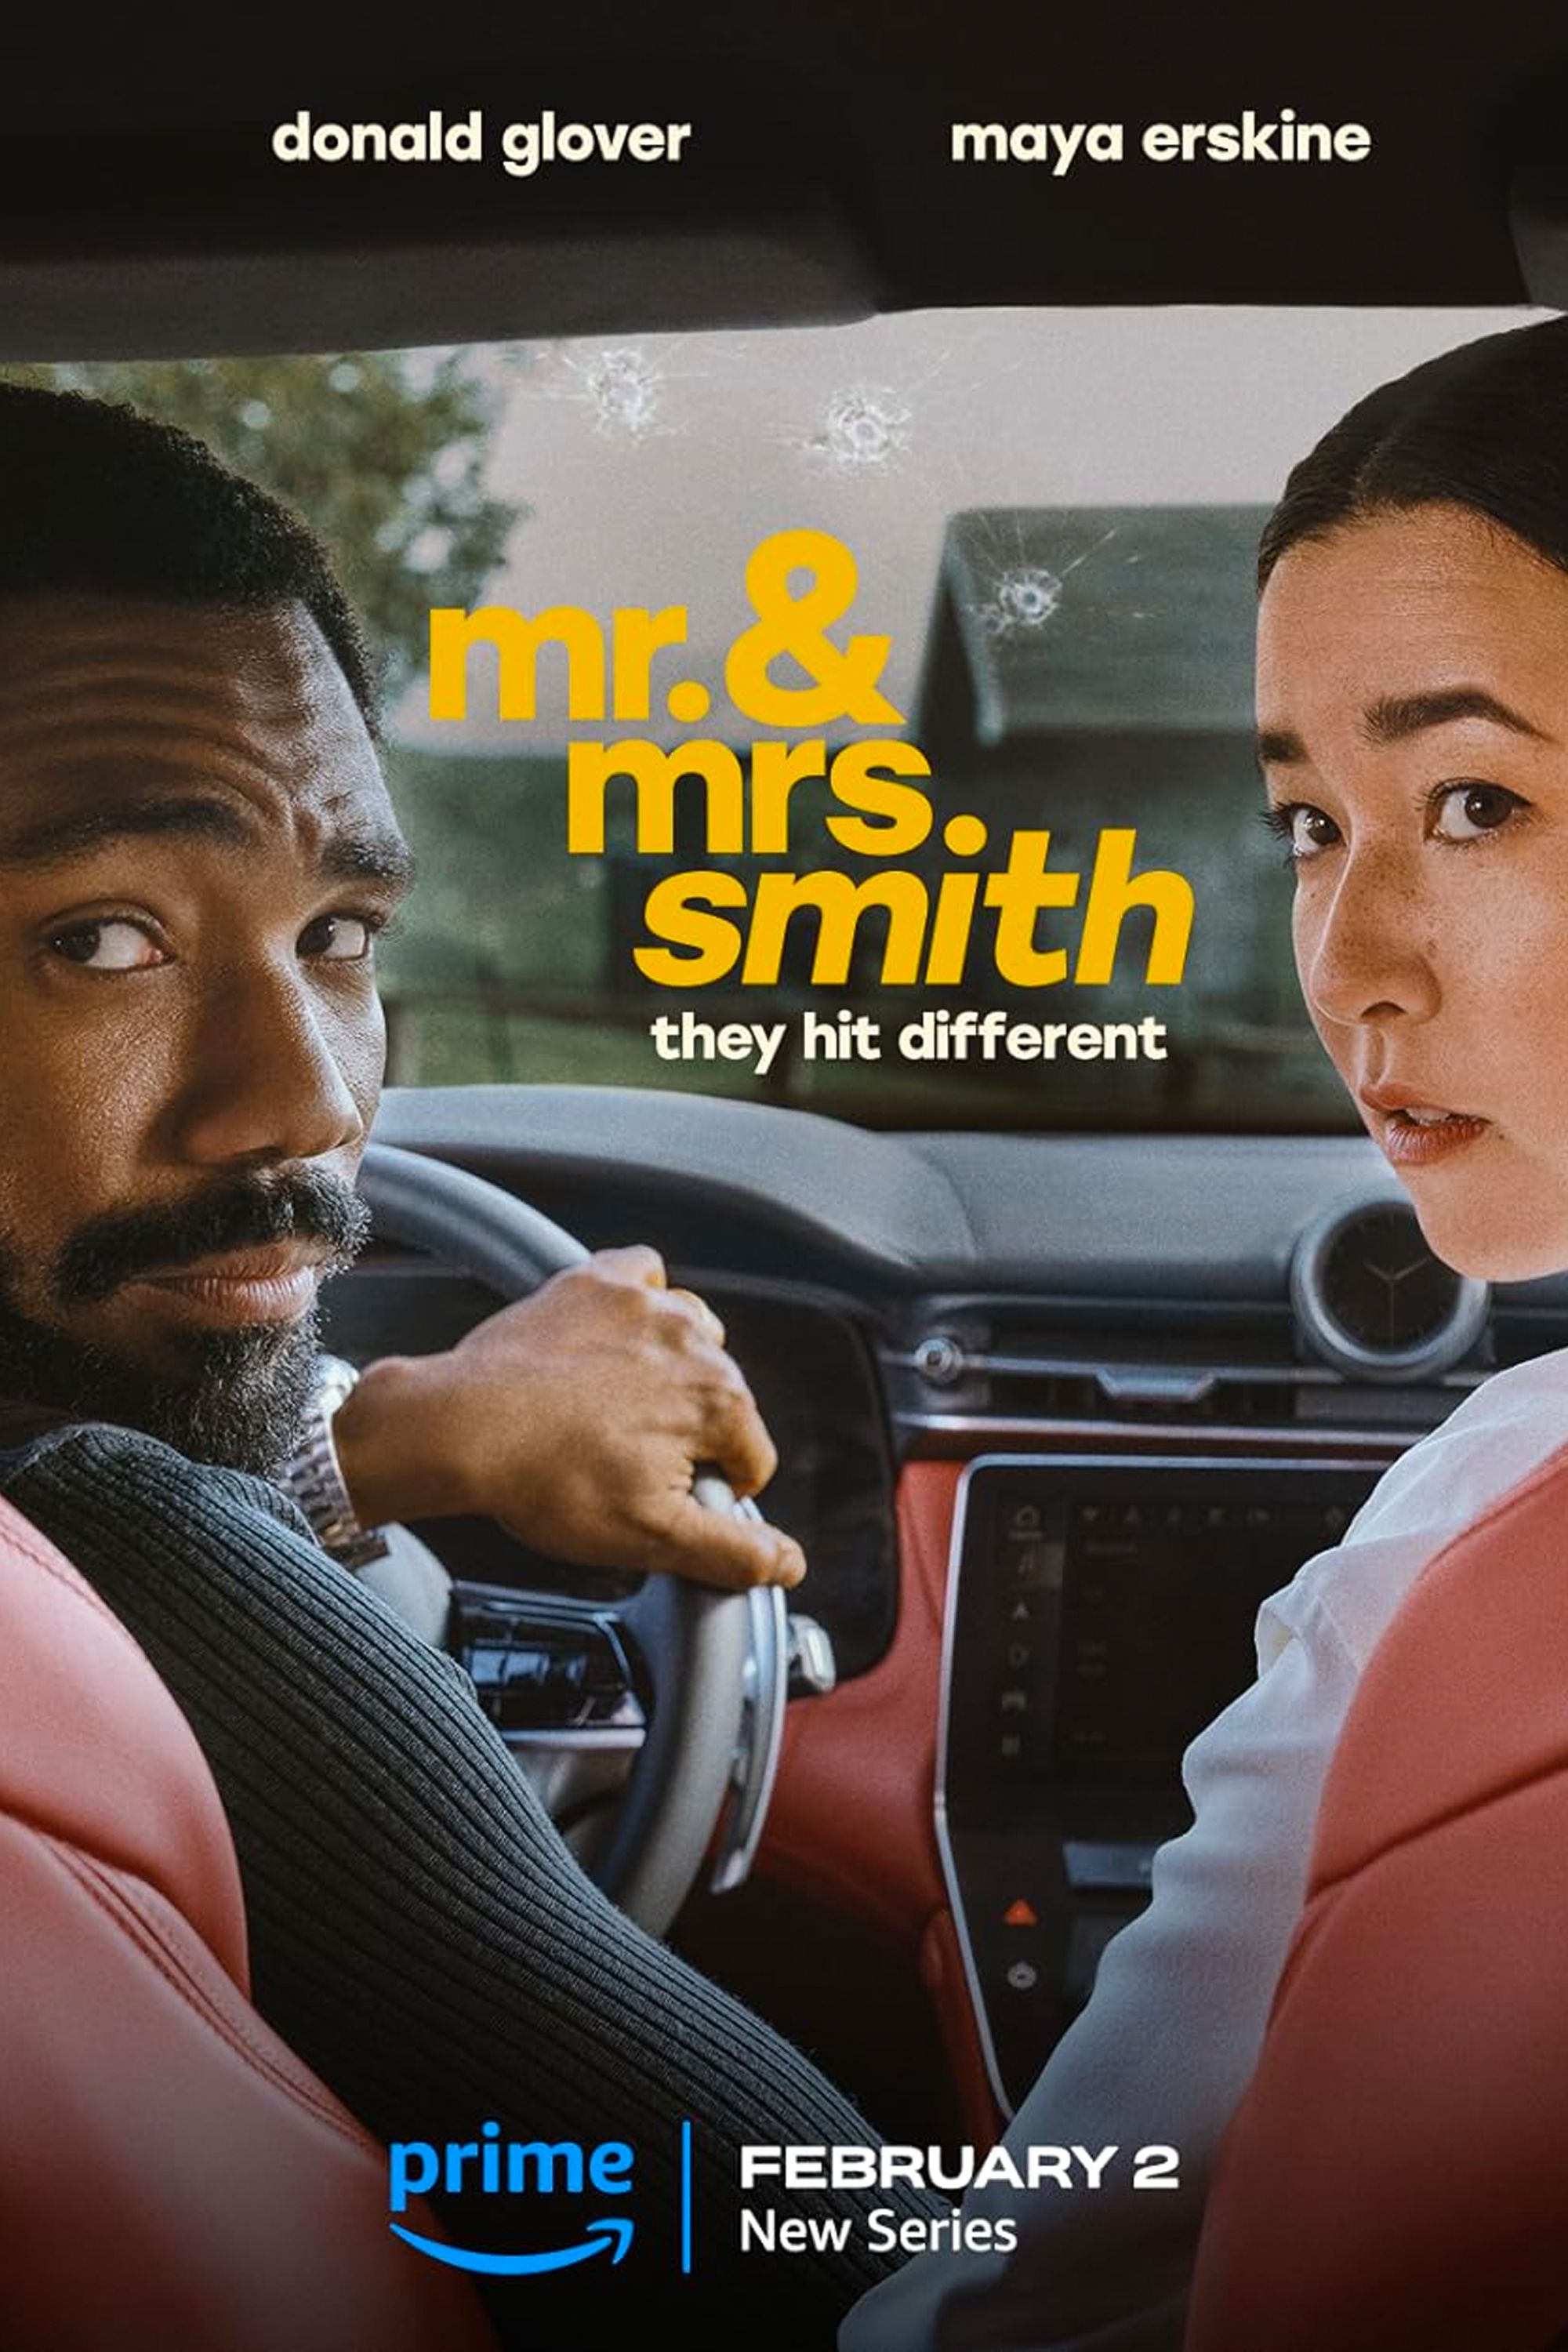 Poster for the television show Mr and Mrs Smith showing Donald Glover and Maya Erskine looking back at a car with bullet holes in the windshield. 